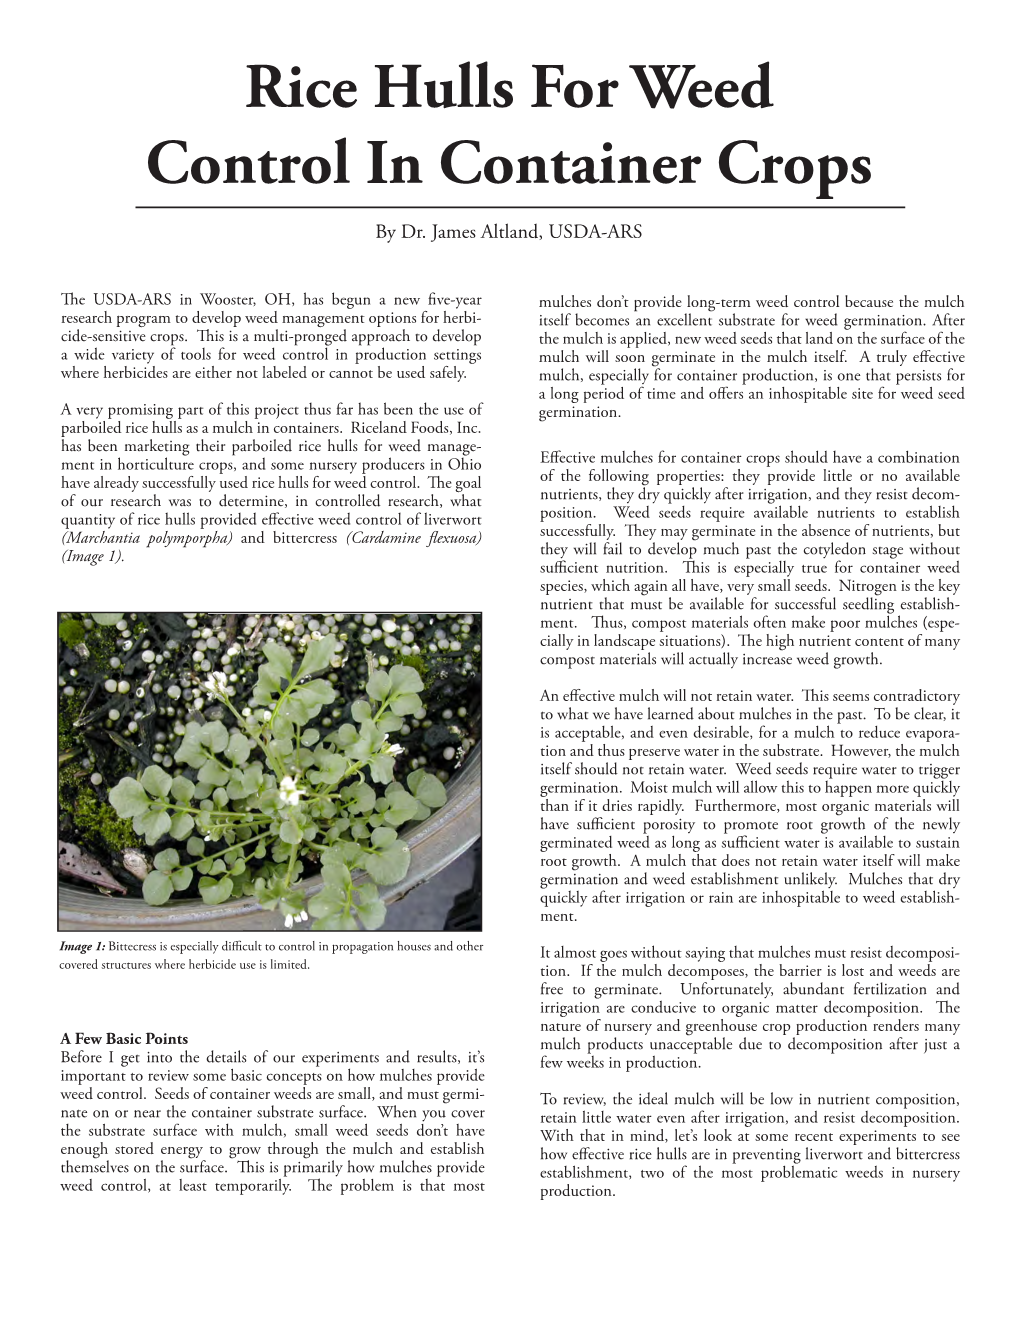 Rice Hulls for Weed Control in Container Crops